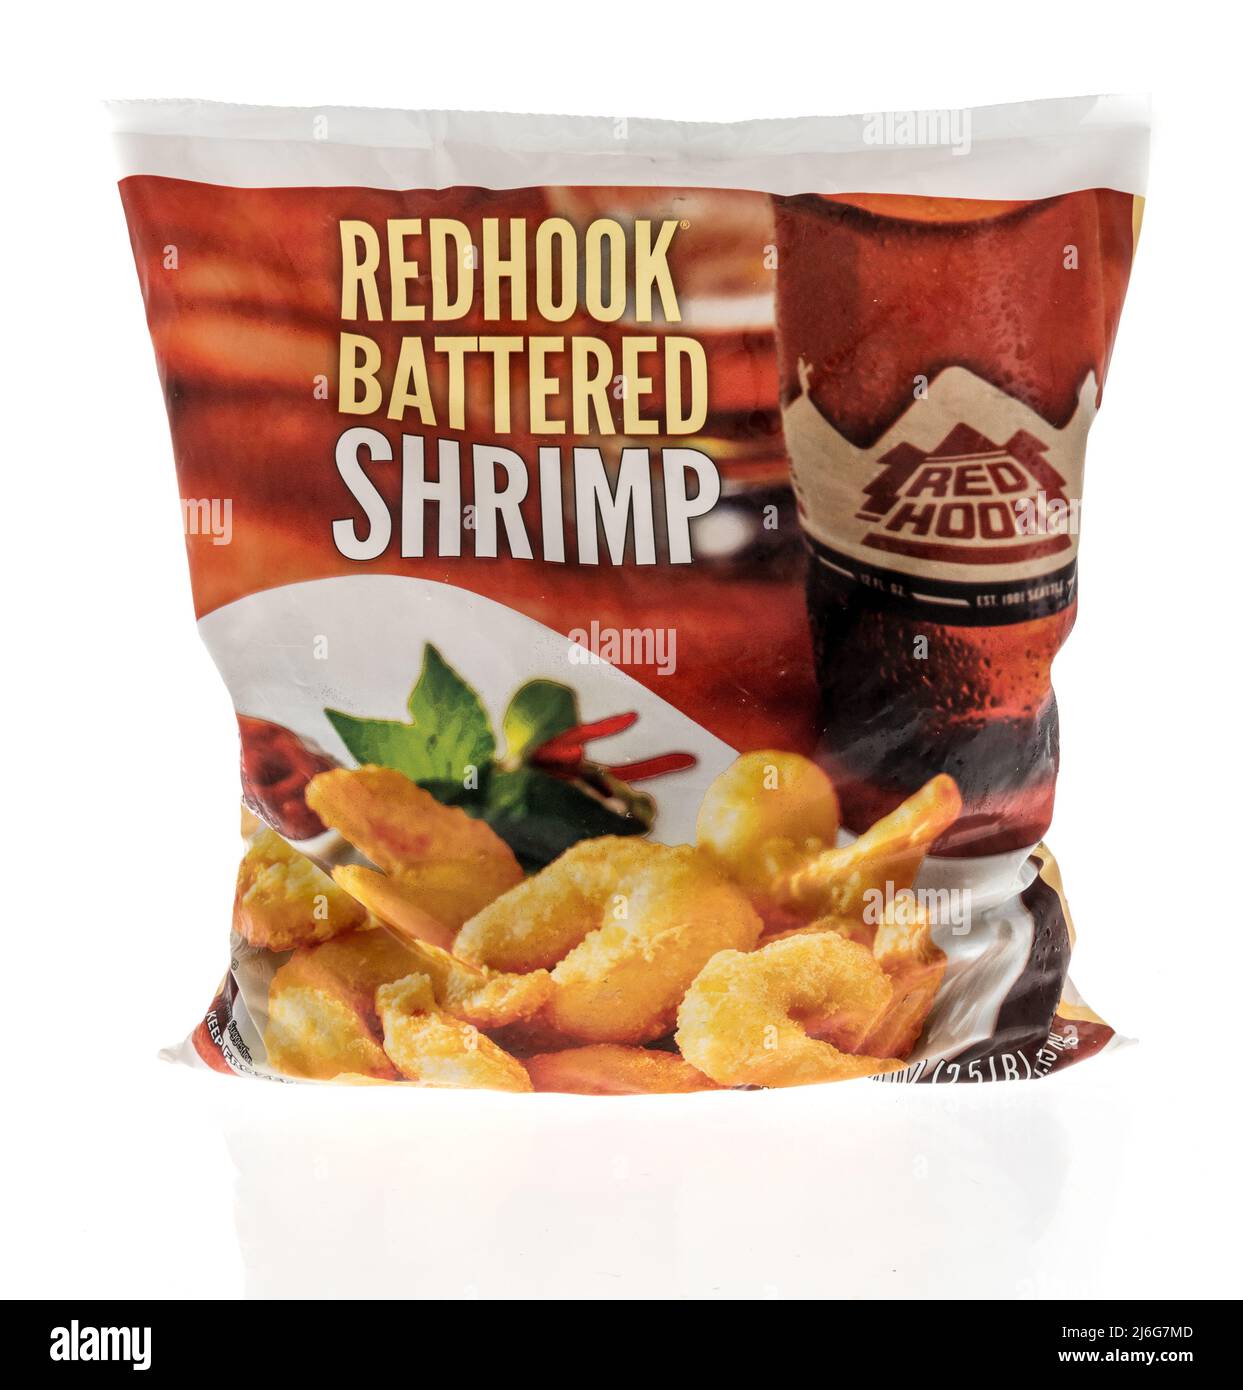 Winneconne, WI -23 April 2022: A package of Redhook battered shrimp on an isolated background Stock Photo